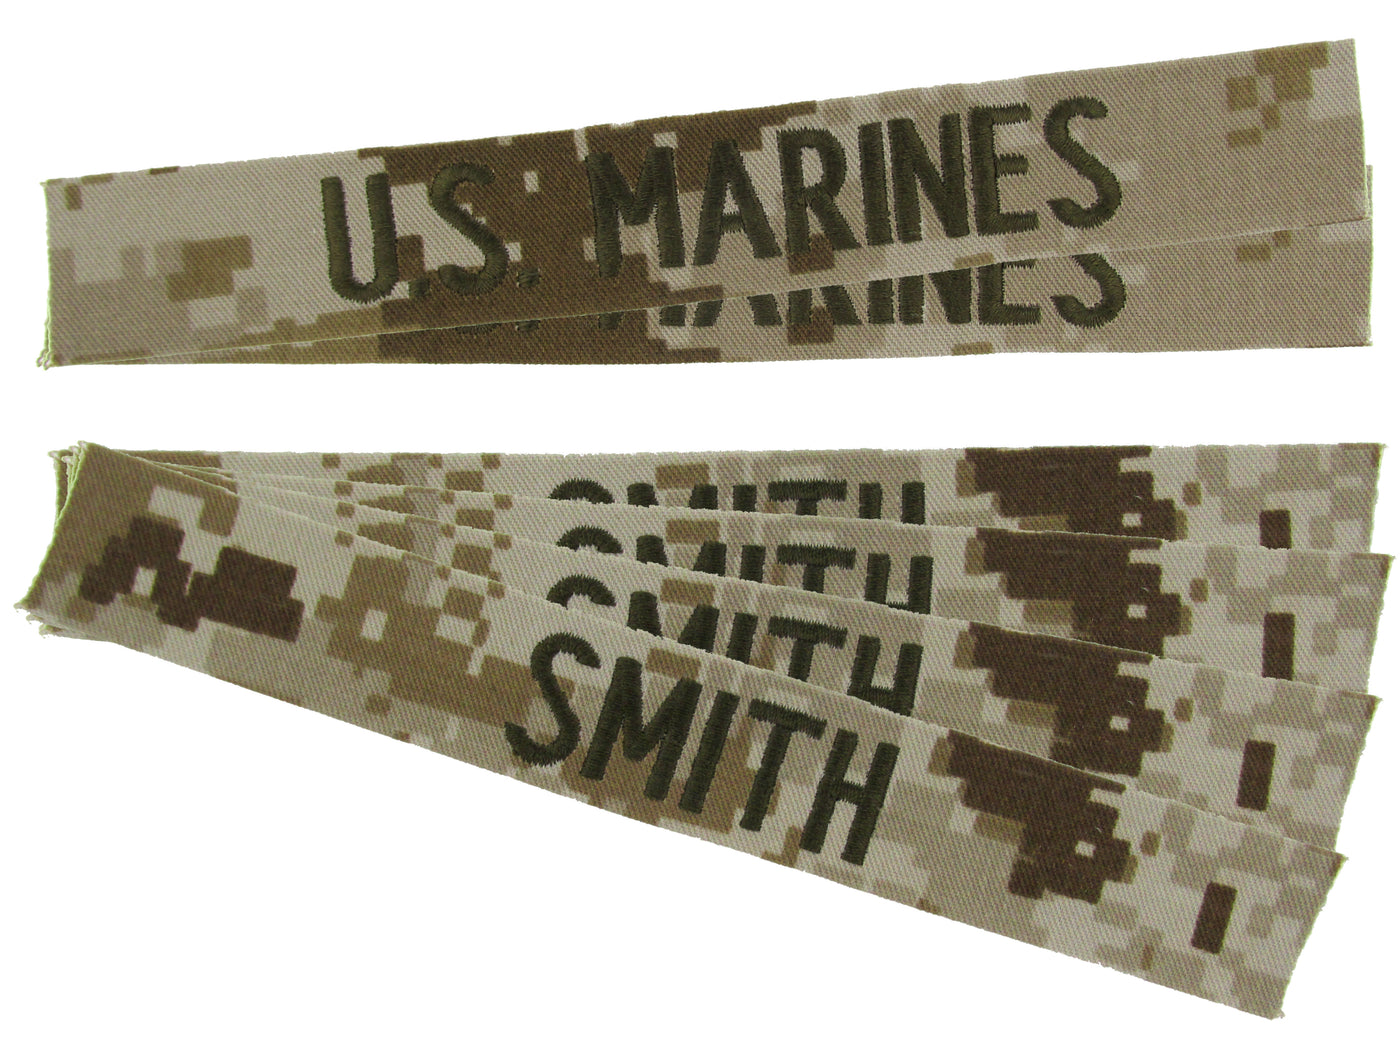 USMC Name Tapes and Name Tags